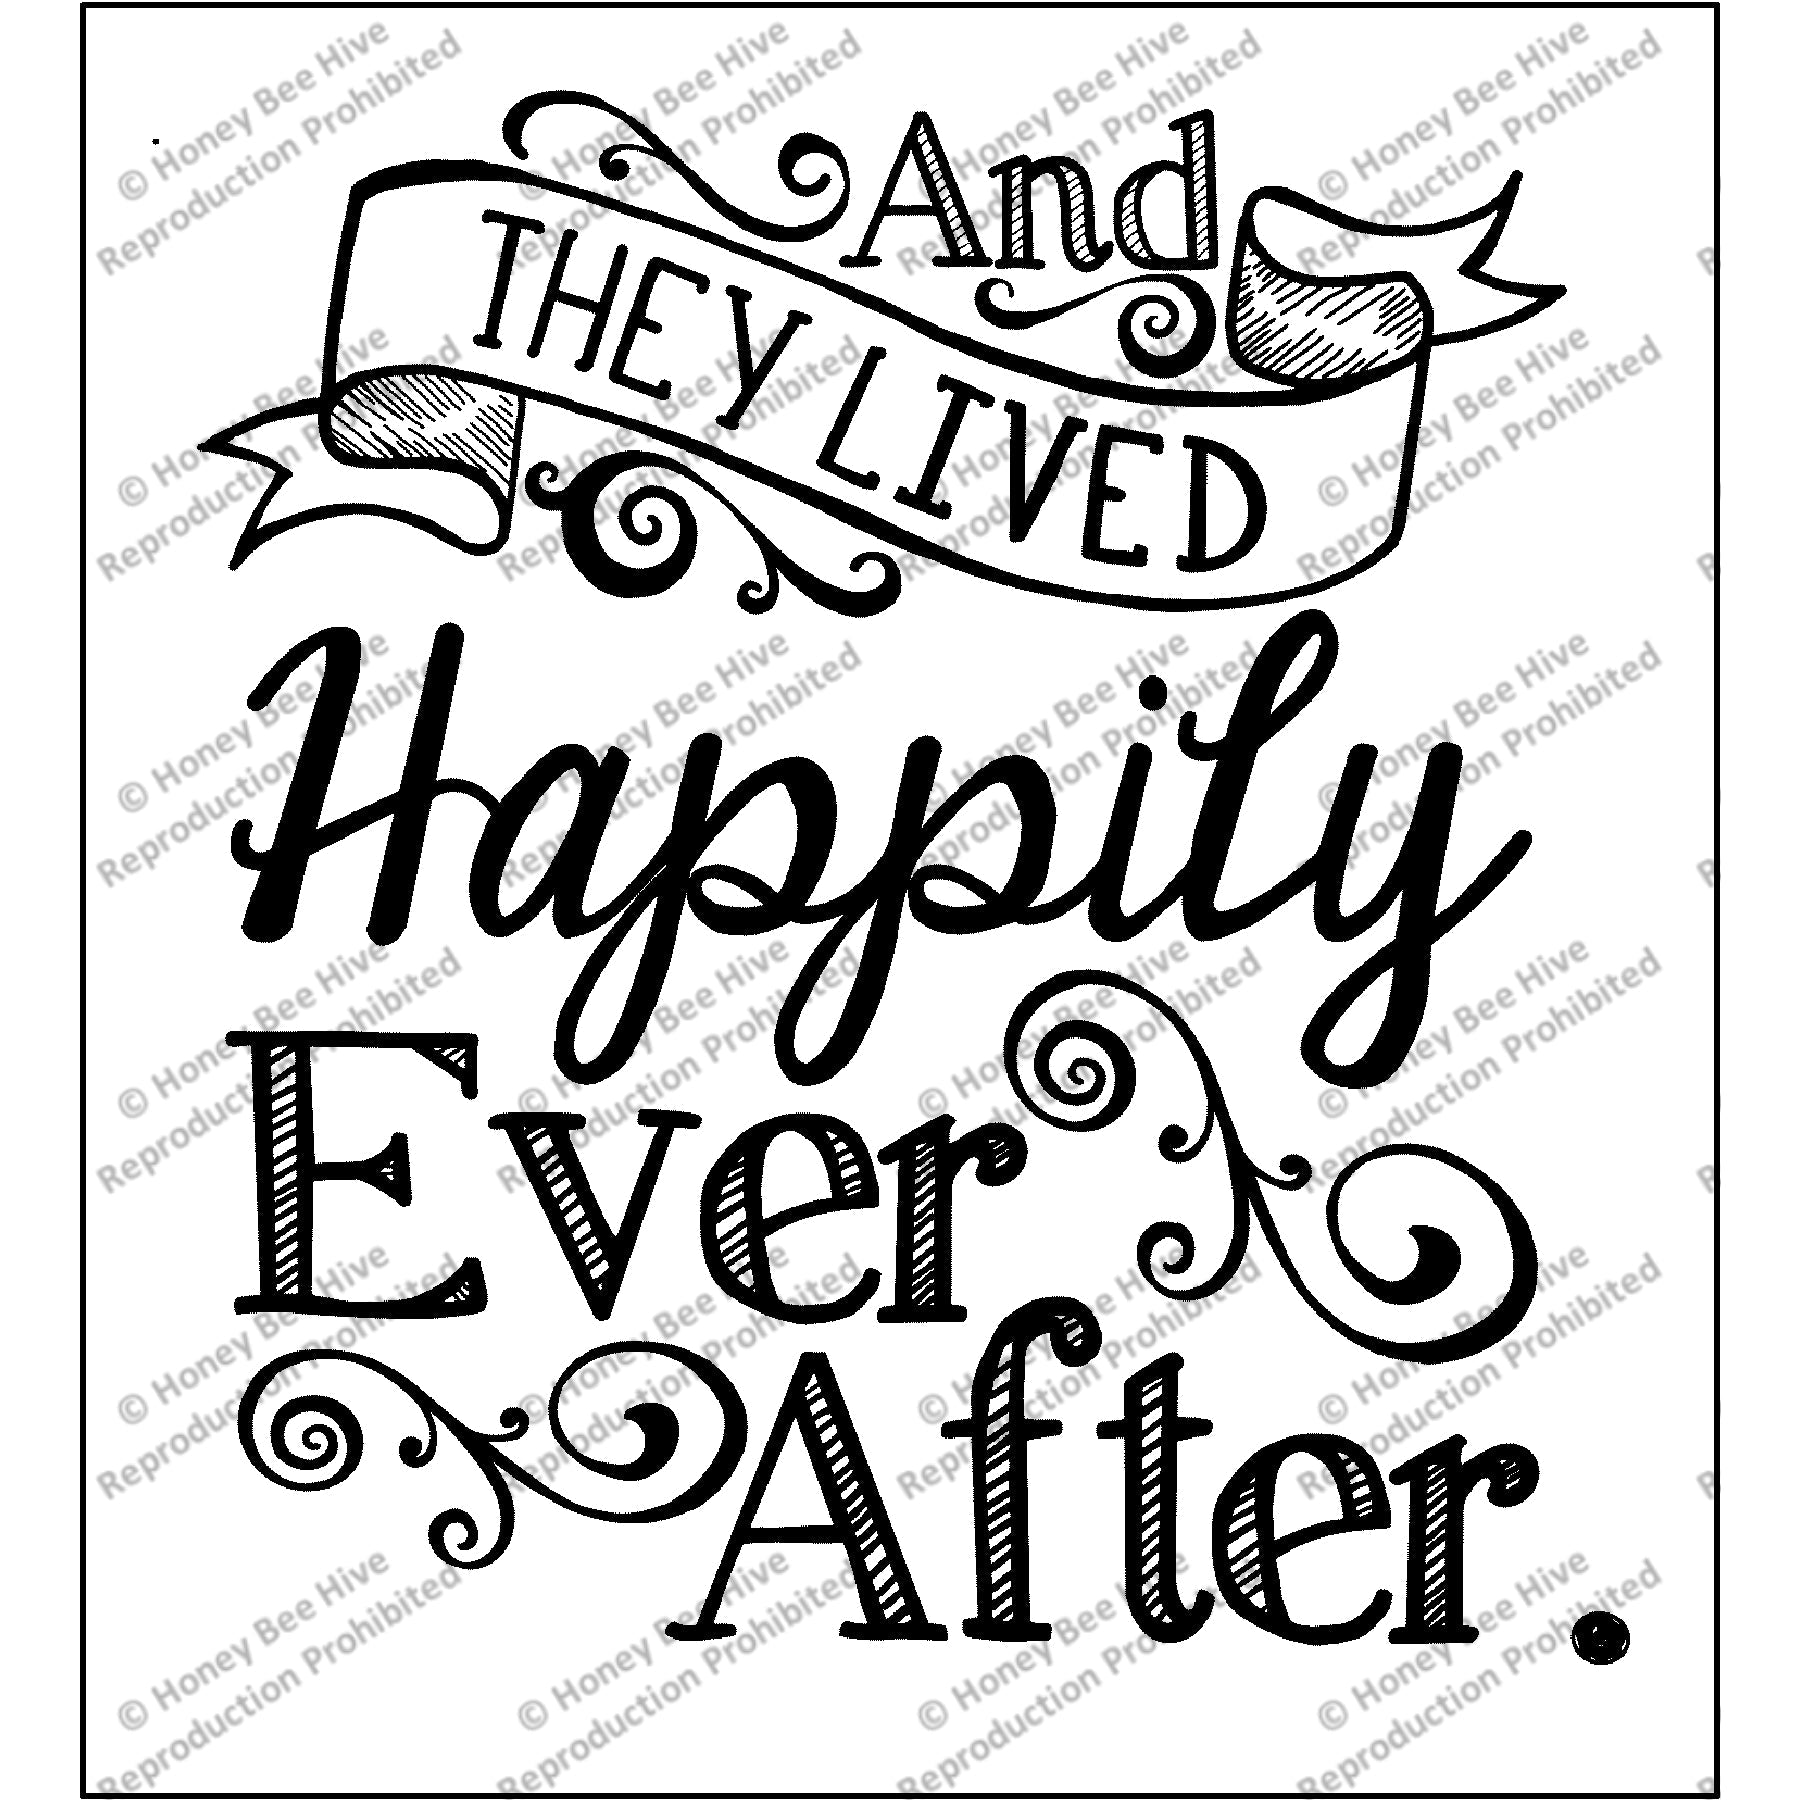 Happily Ever After, rug hooking pattern